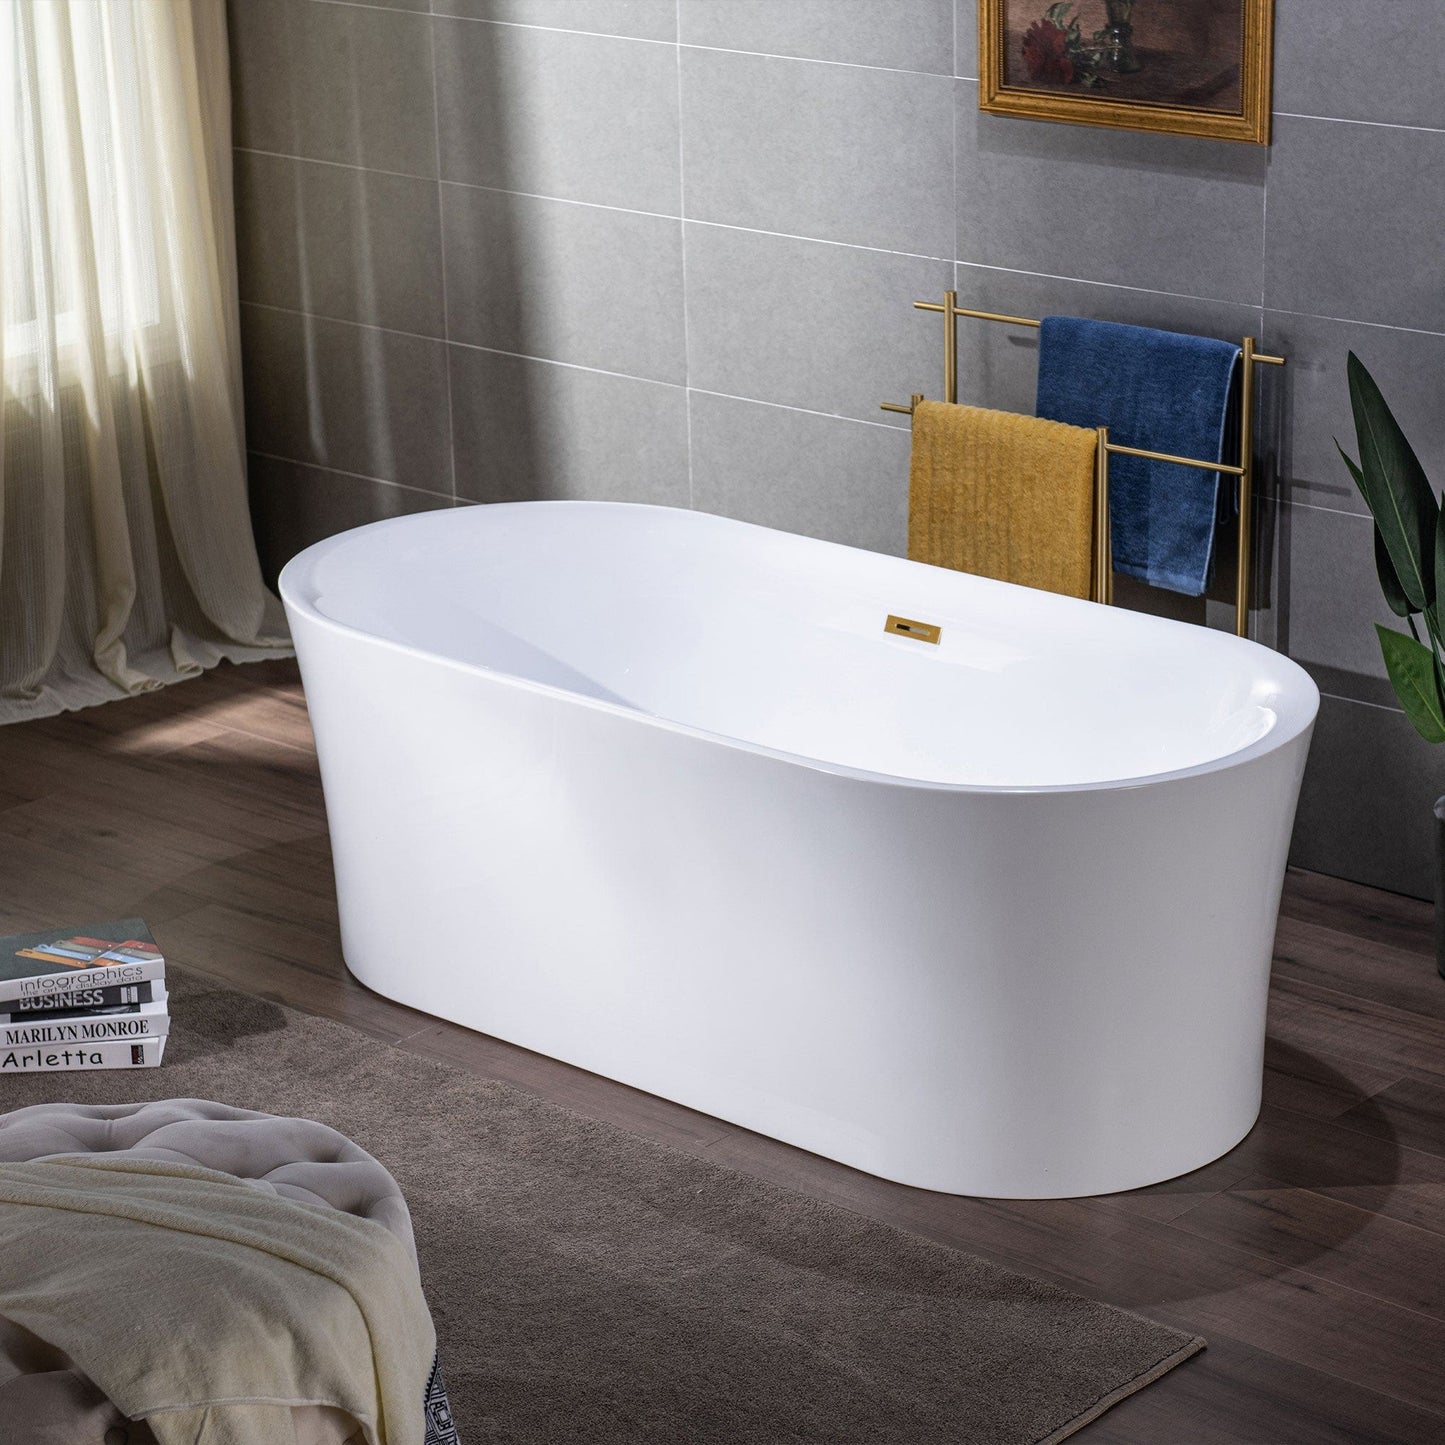 WoodBridge B0058 59" White Acrylic Freestanding Contemporary Soaking Bathtub With Brushed Gold Overflow and Drain